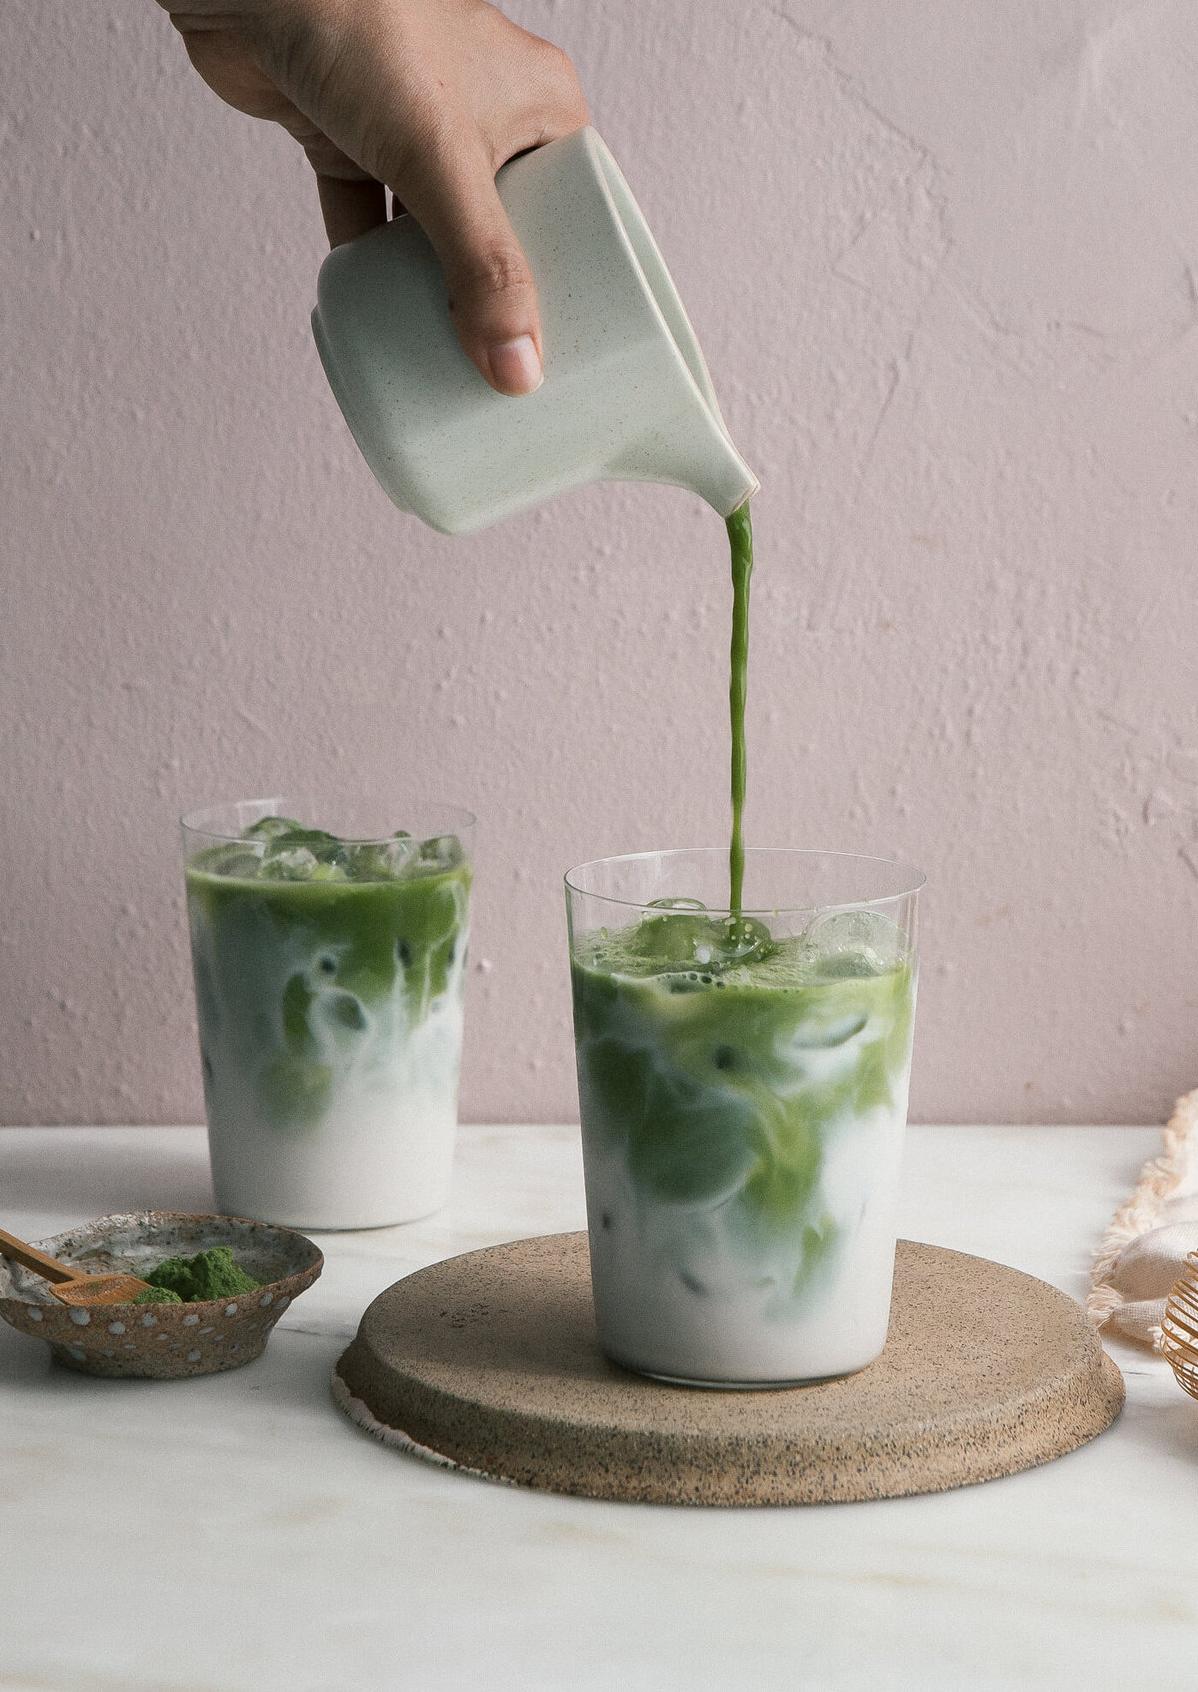  No need to hit up your local coffee shop for a matcha latte fix when you can easily make it at home